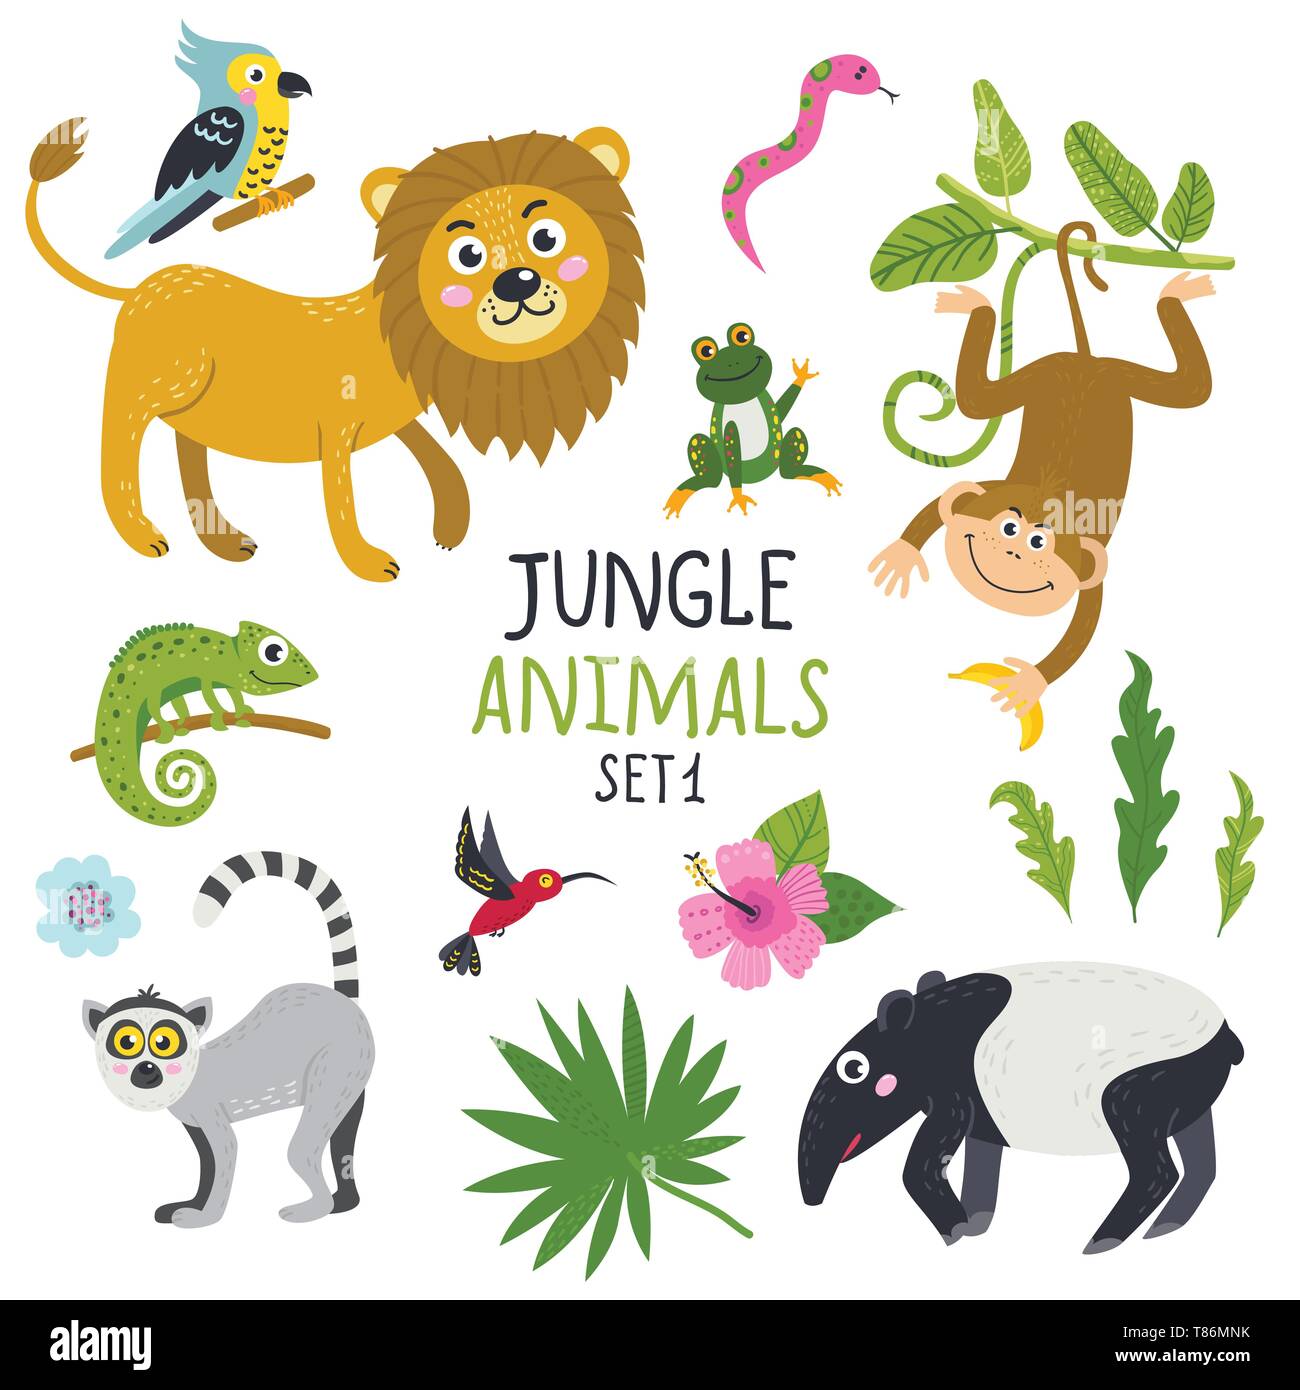 Vector set of cute jungle animals and plants. Tropical animals PNG clipart.  Elements for stickers, cards, invitations and posters.